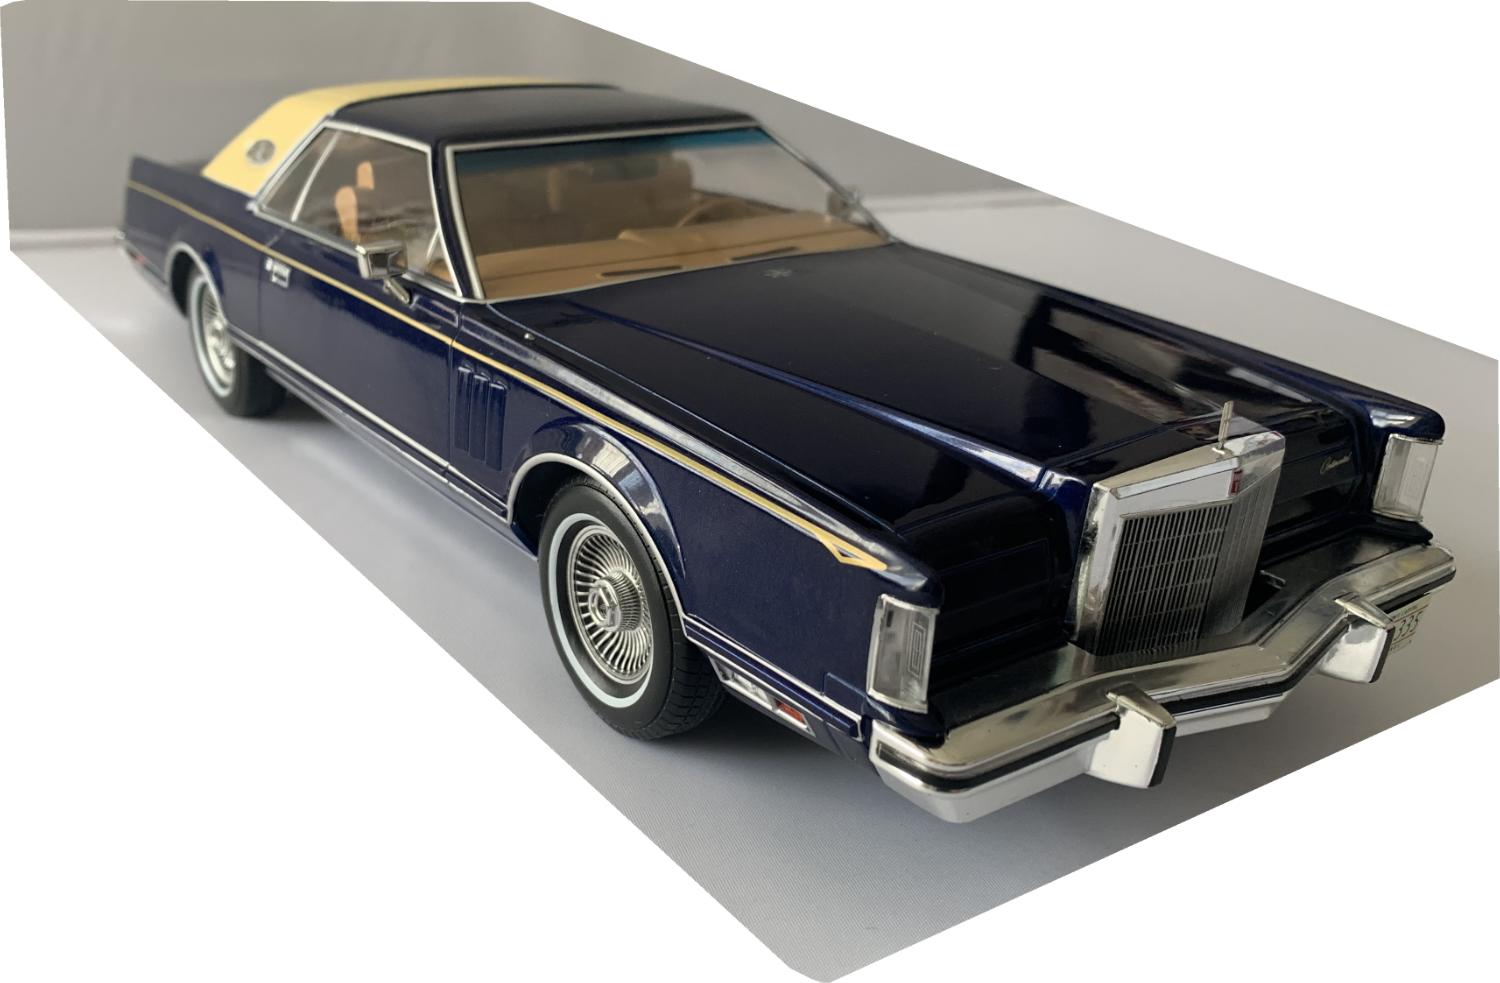 A very good representation of the Lincoln Continental mk5 decorated in blue and cream, fine coachlines, silver wheels with white rim tyres.